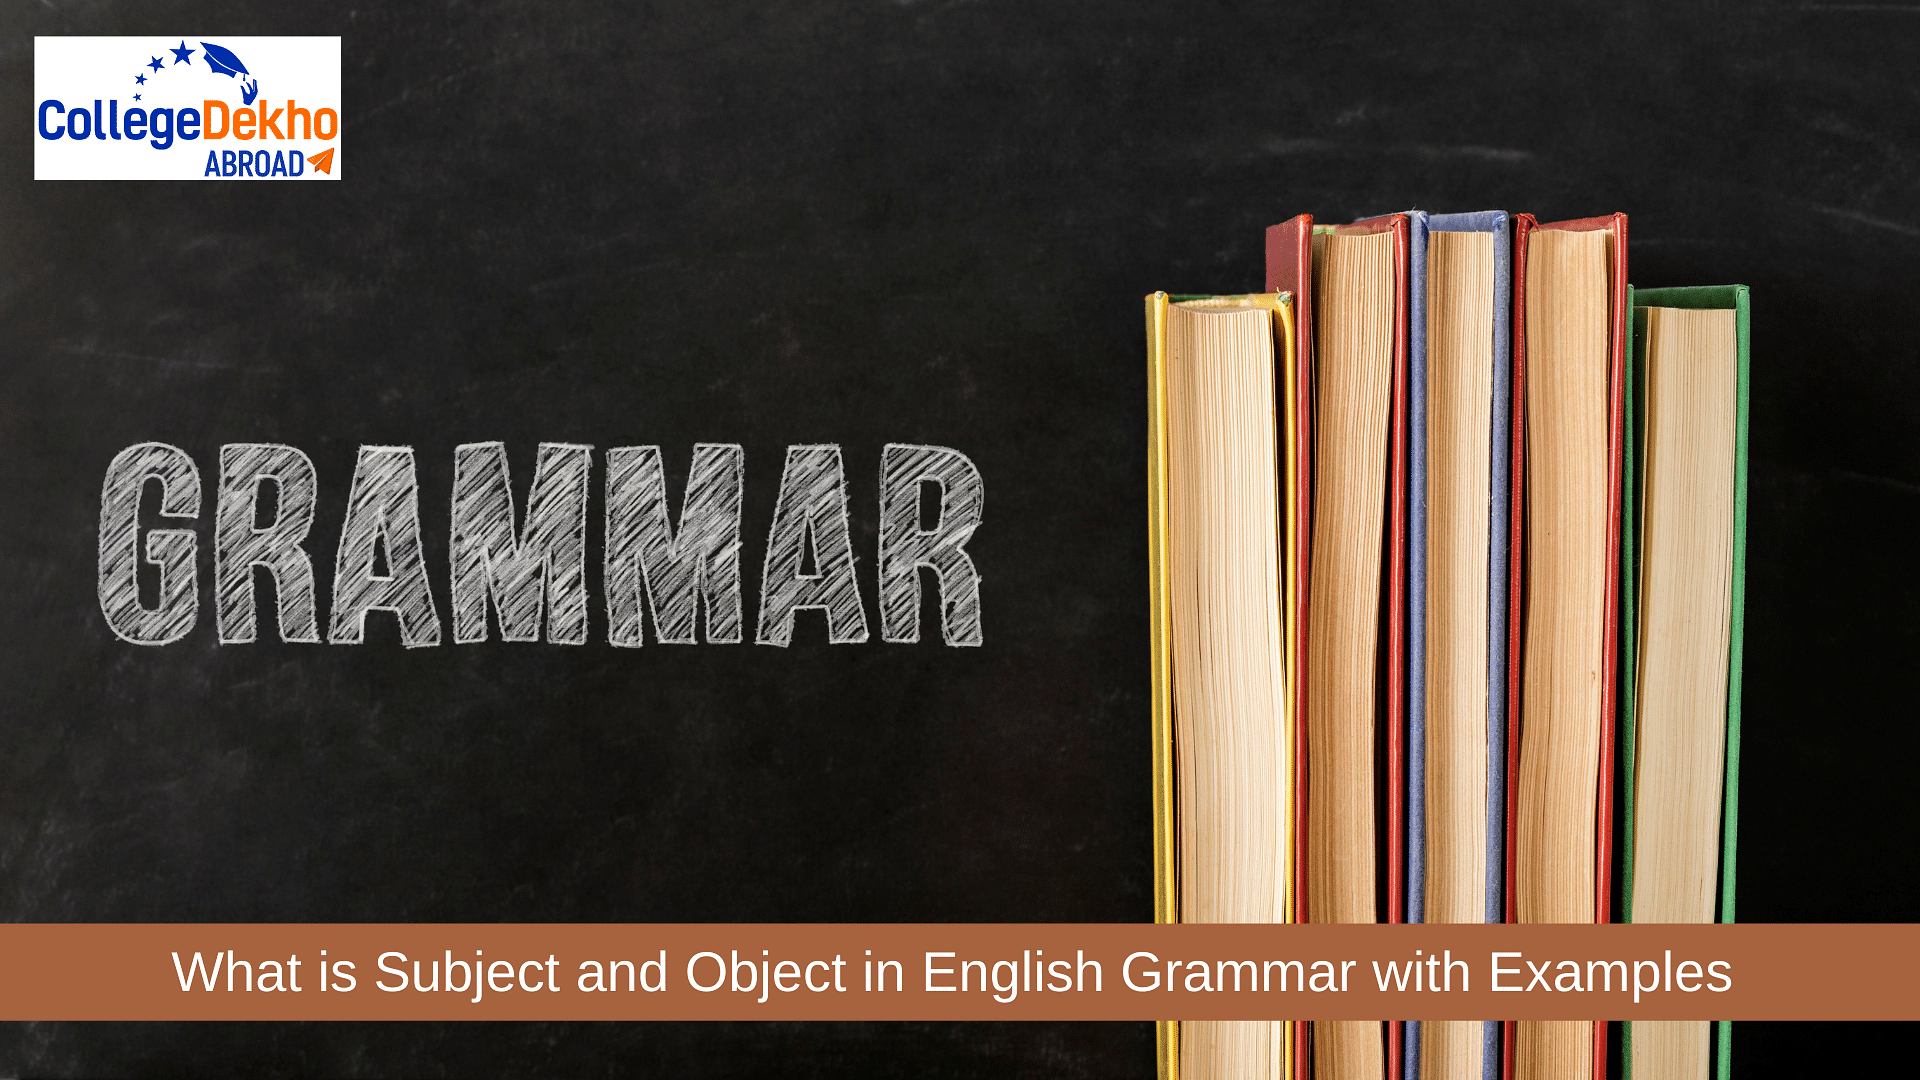 IELTS: Understand What is Subject and Object in English Grammar with Examples